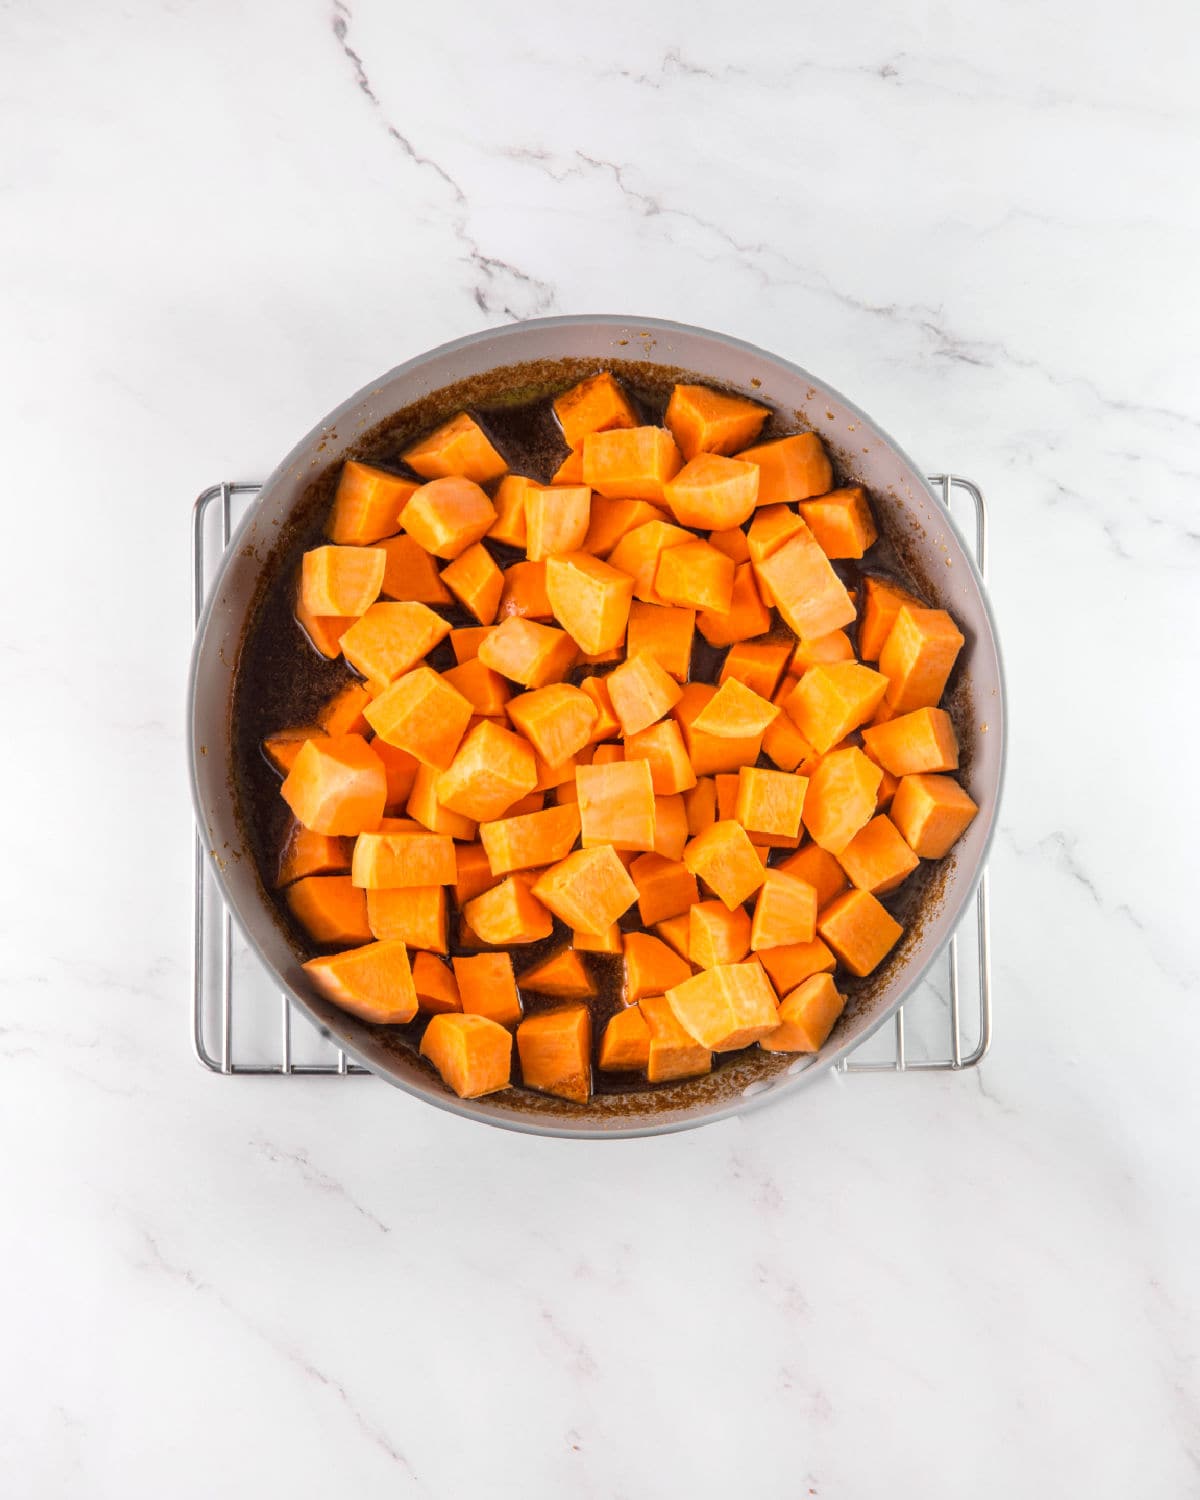 Cubed sweet potatoes in a round handless skillet on a wire rack. White marbled surface.